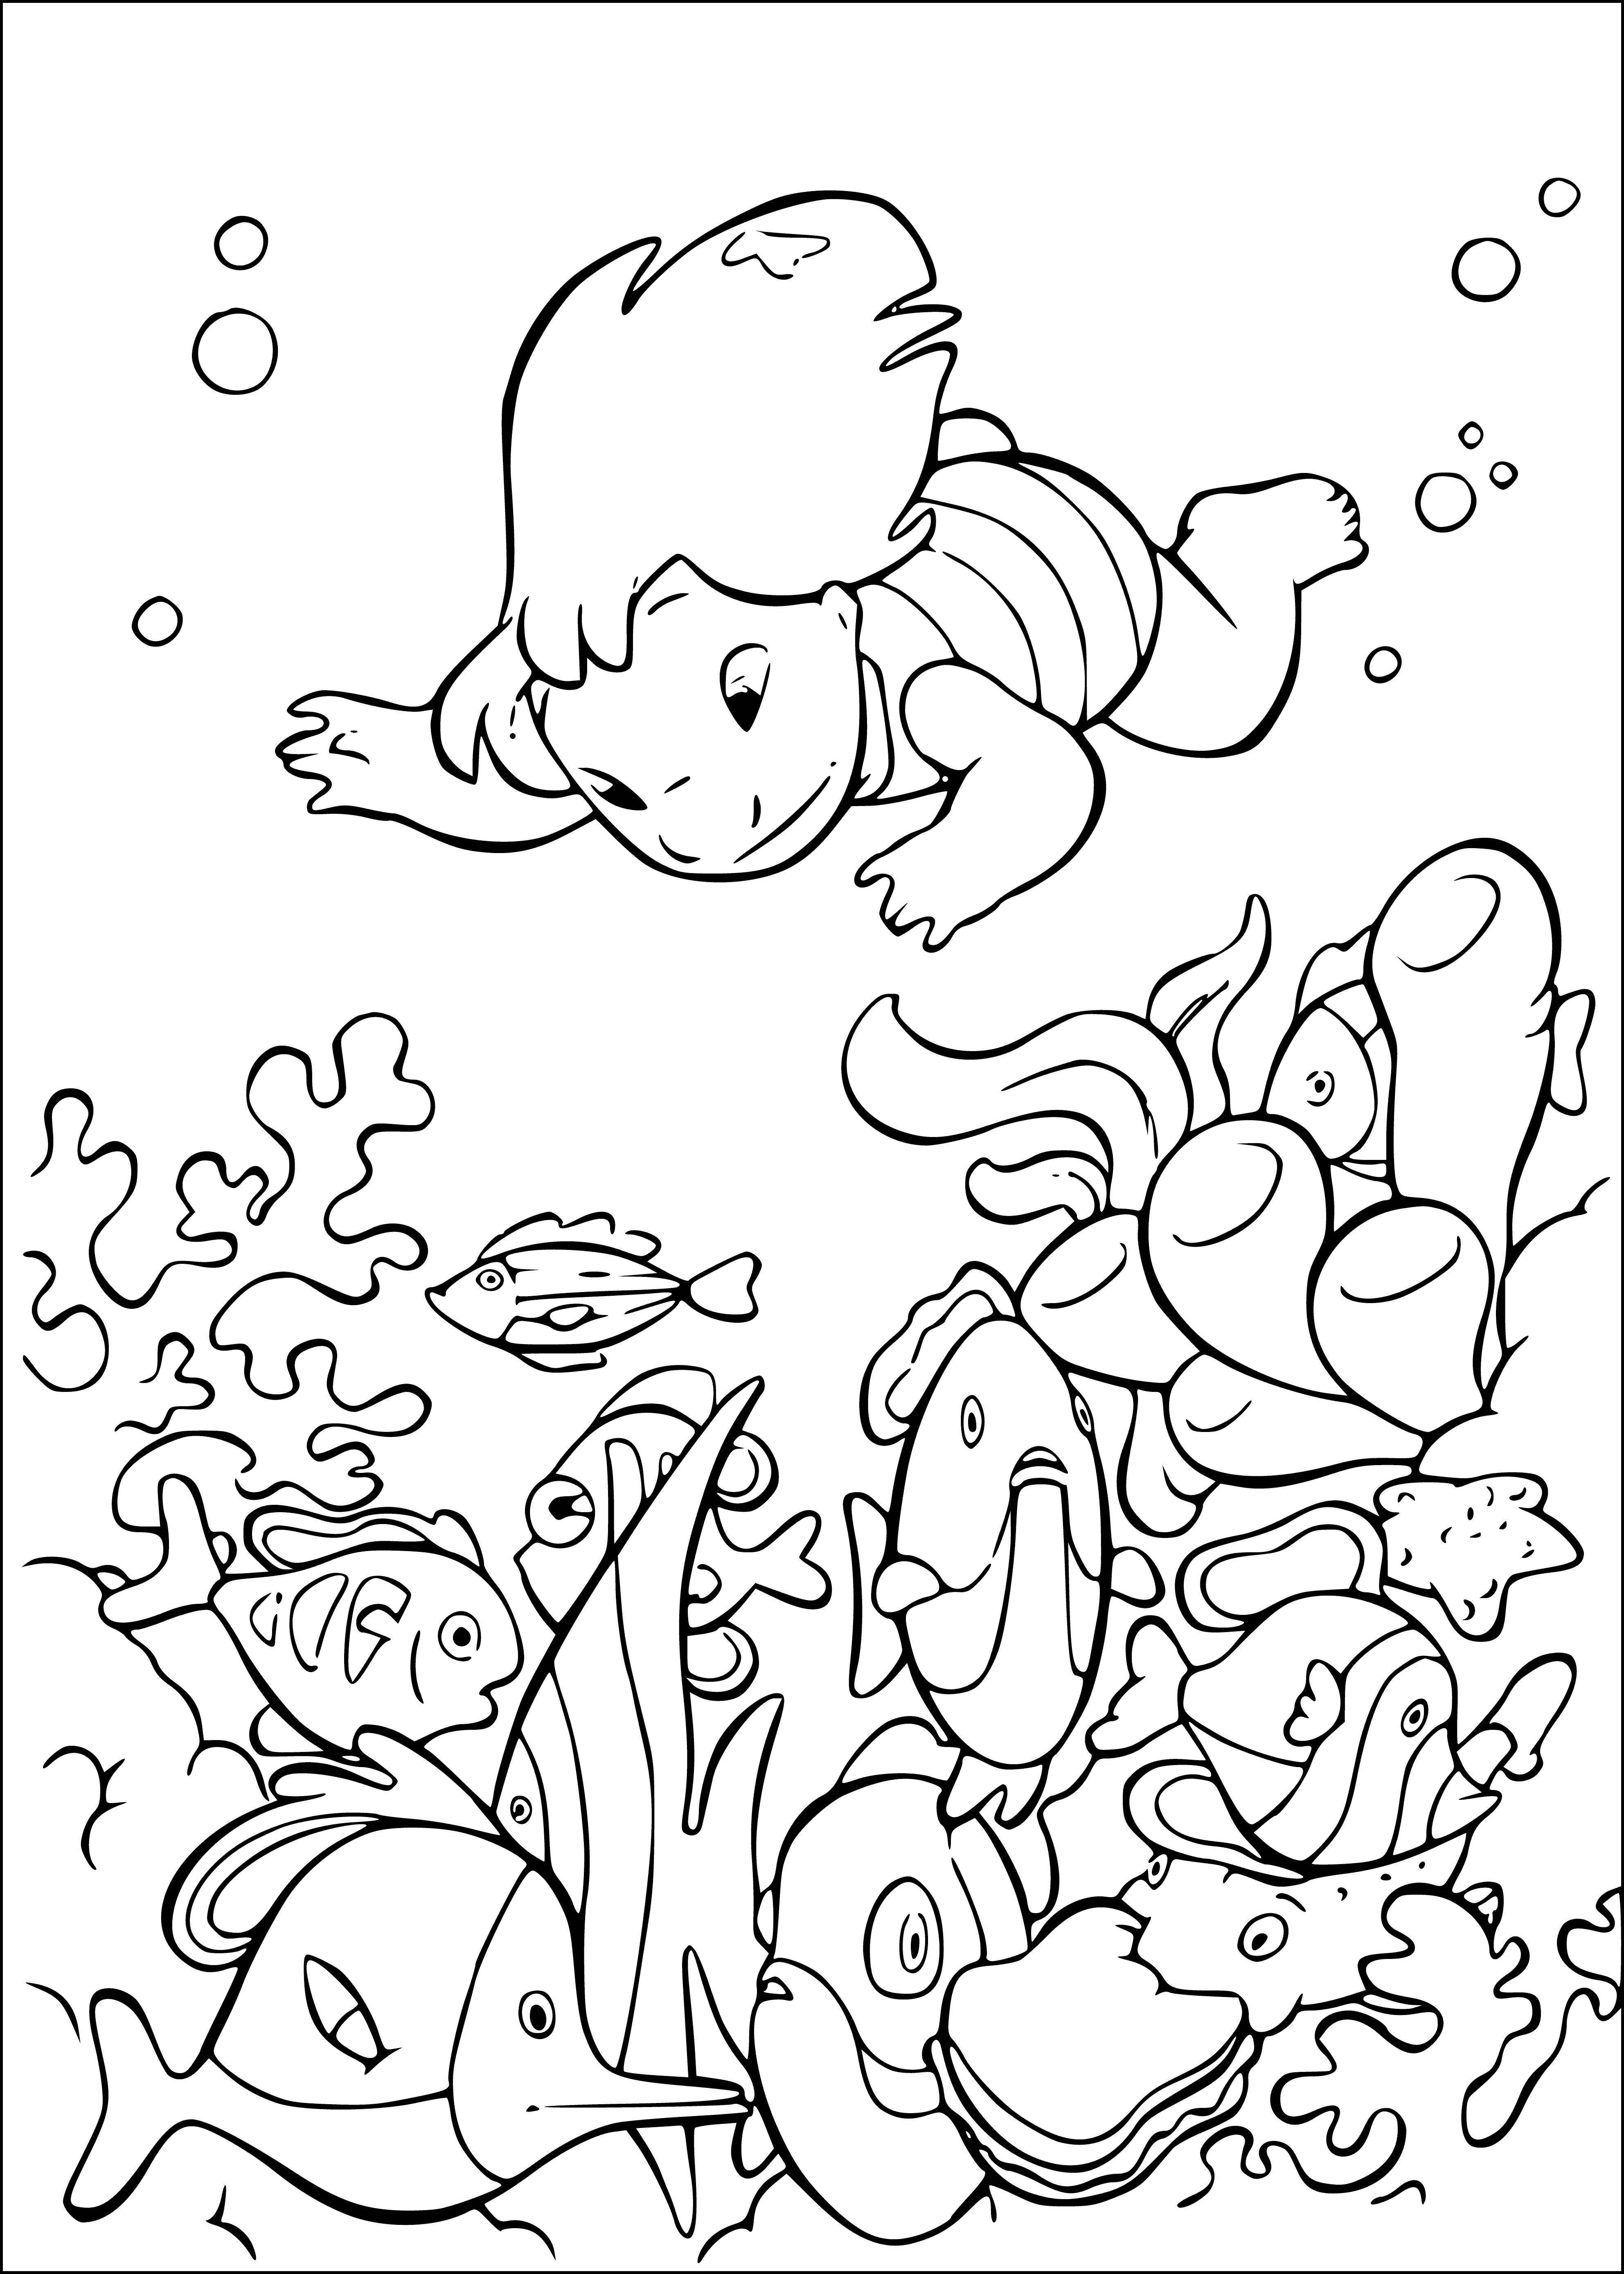 coloring page: Lilo stands on a beach, holding a fish, with her legs in the water, her long black hair cascading down her back.